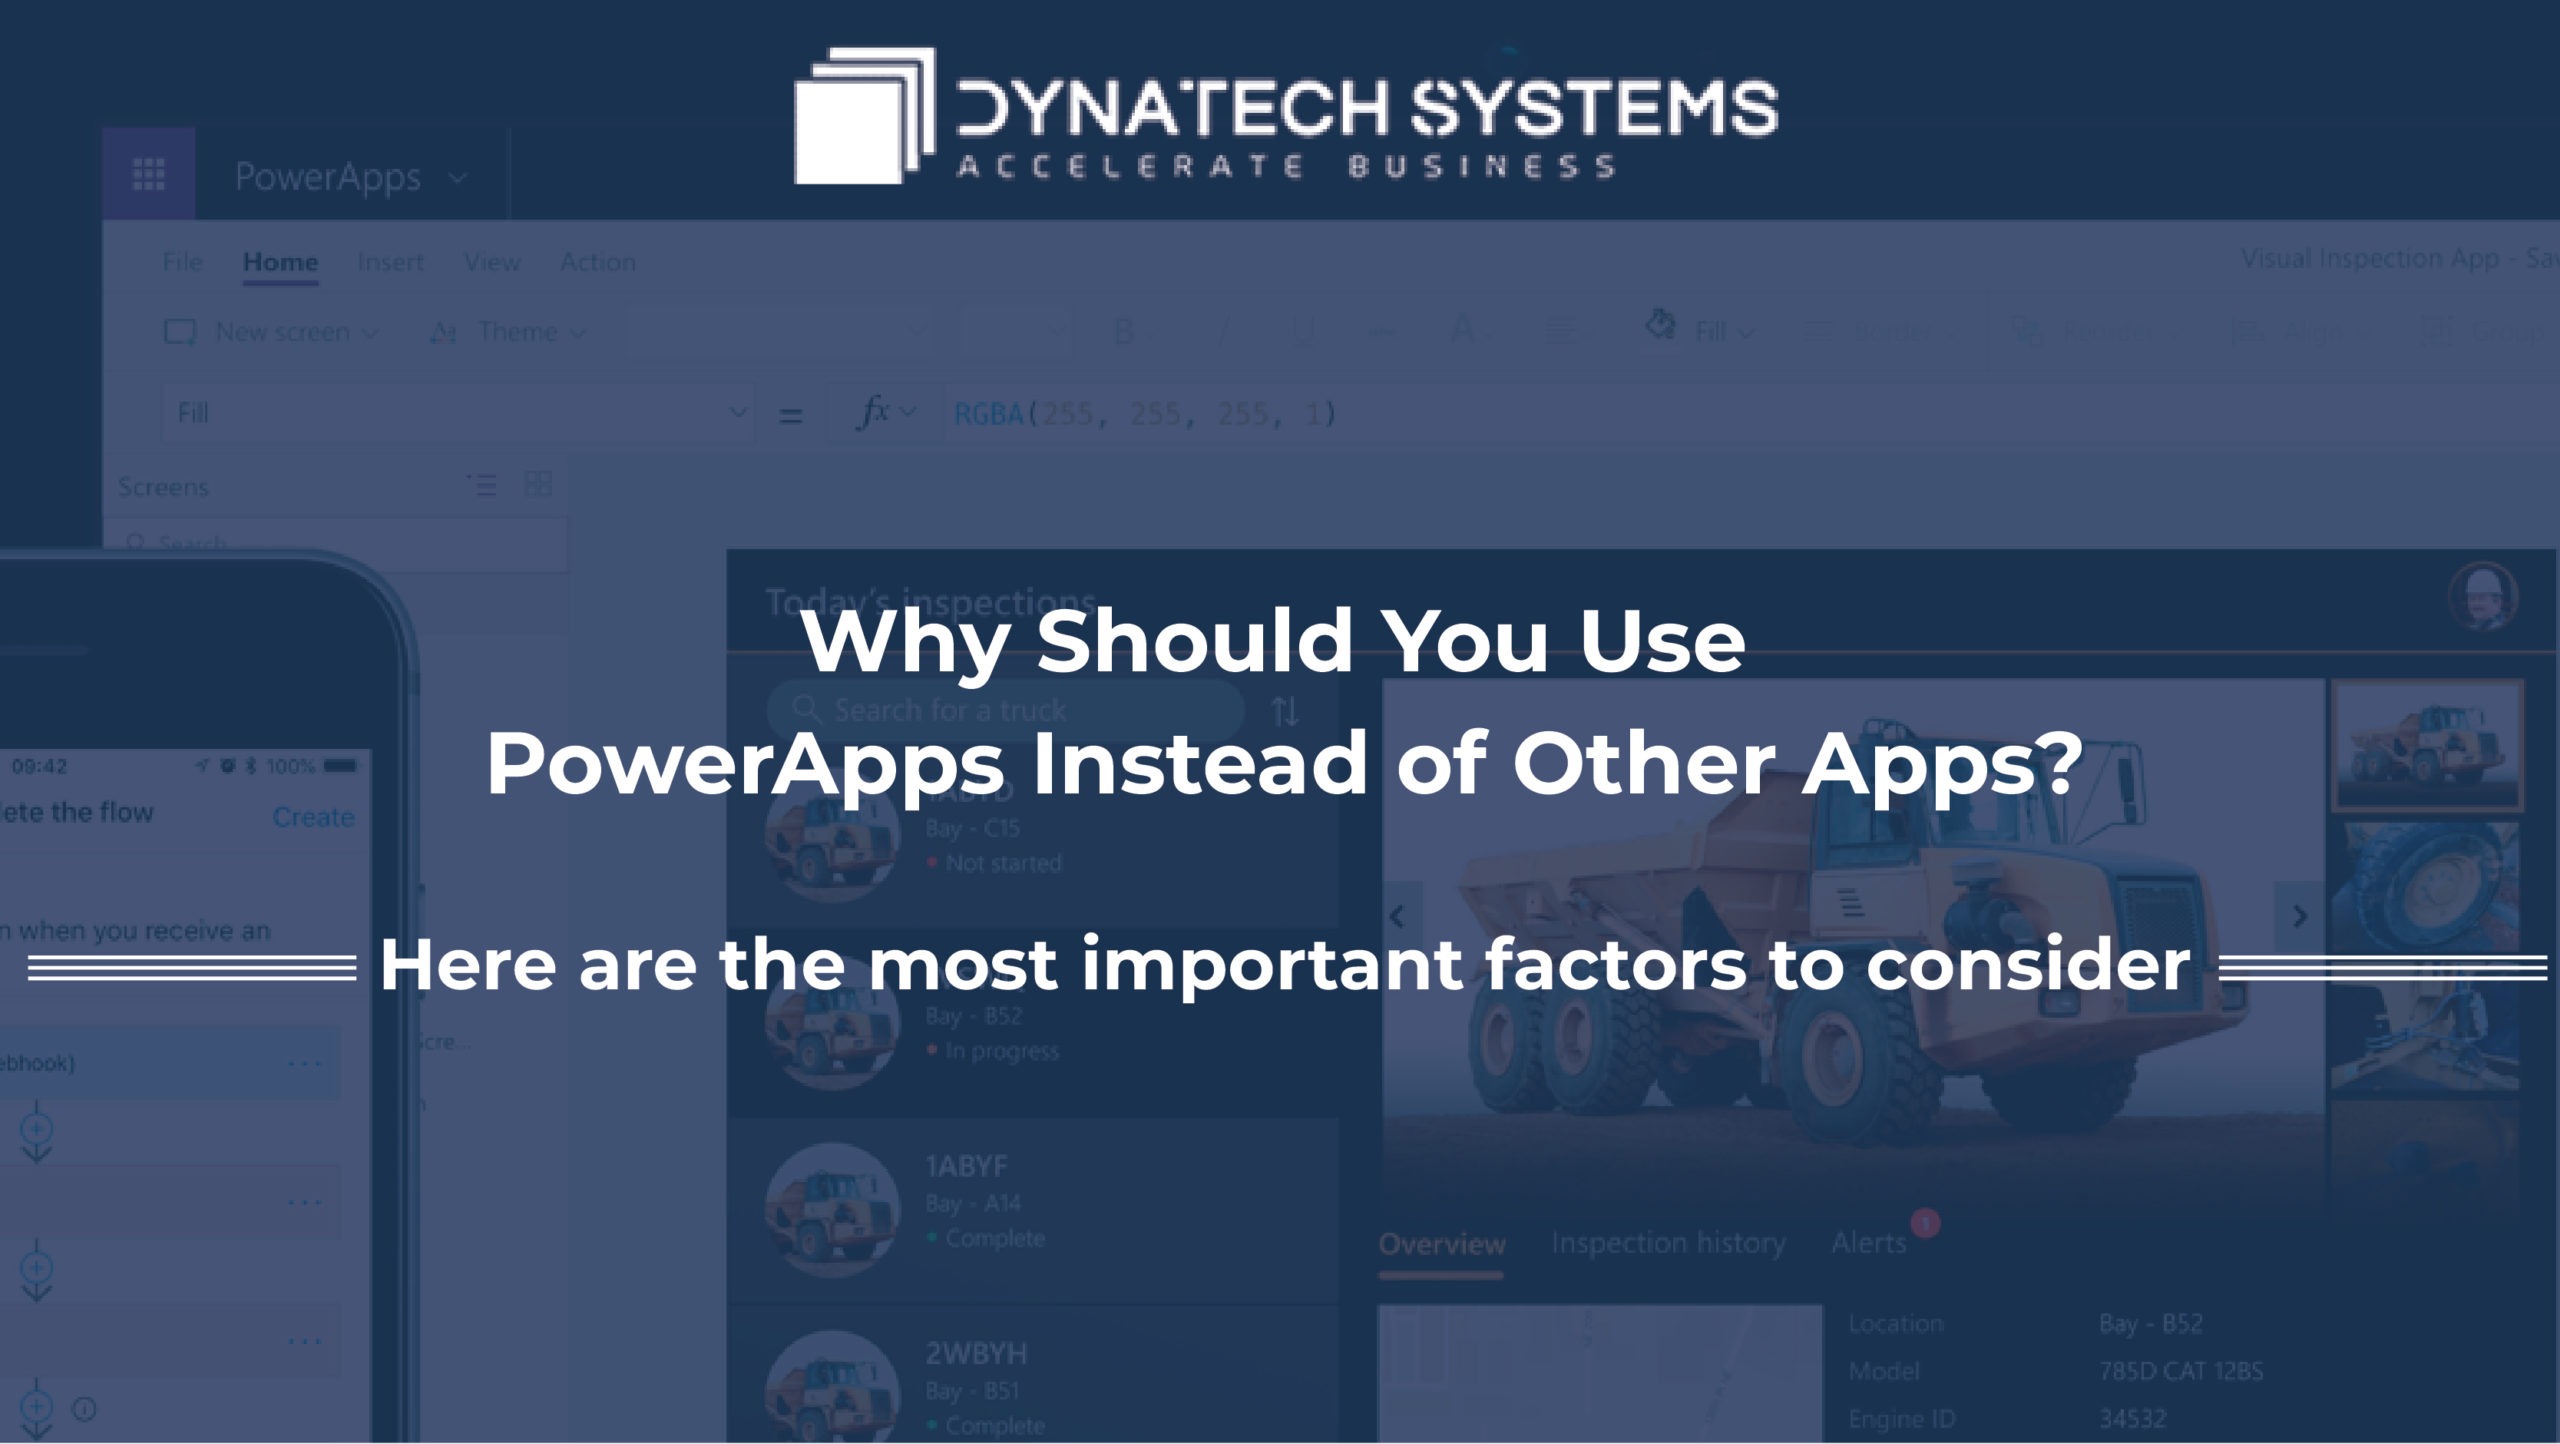 Why Should You Use PowerApps Instead of Other Apps? Here are the most important factors to consider